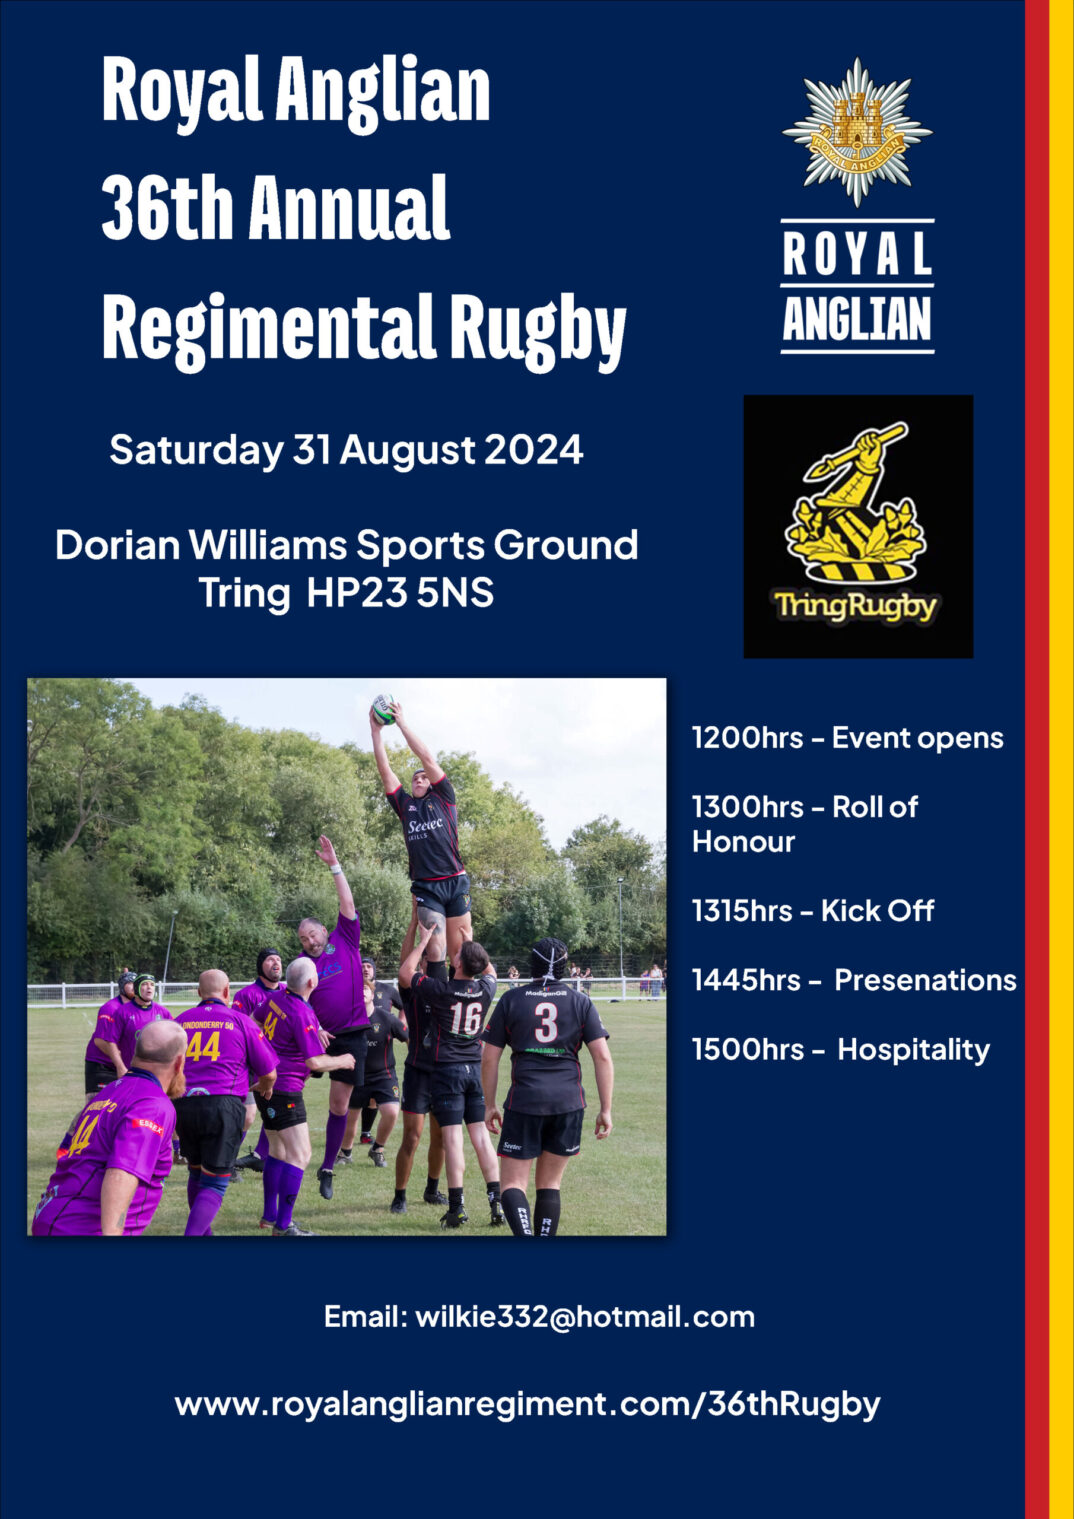 36th Annual Rugby Math Royal Anglian Regiment